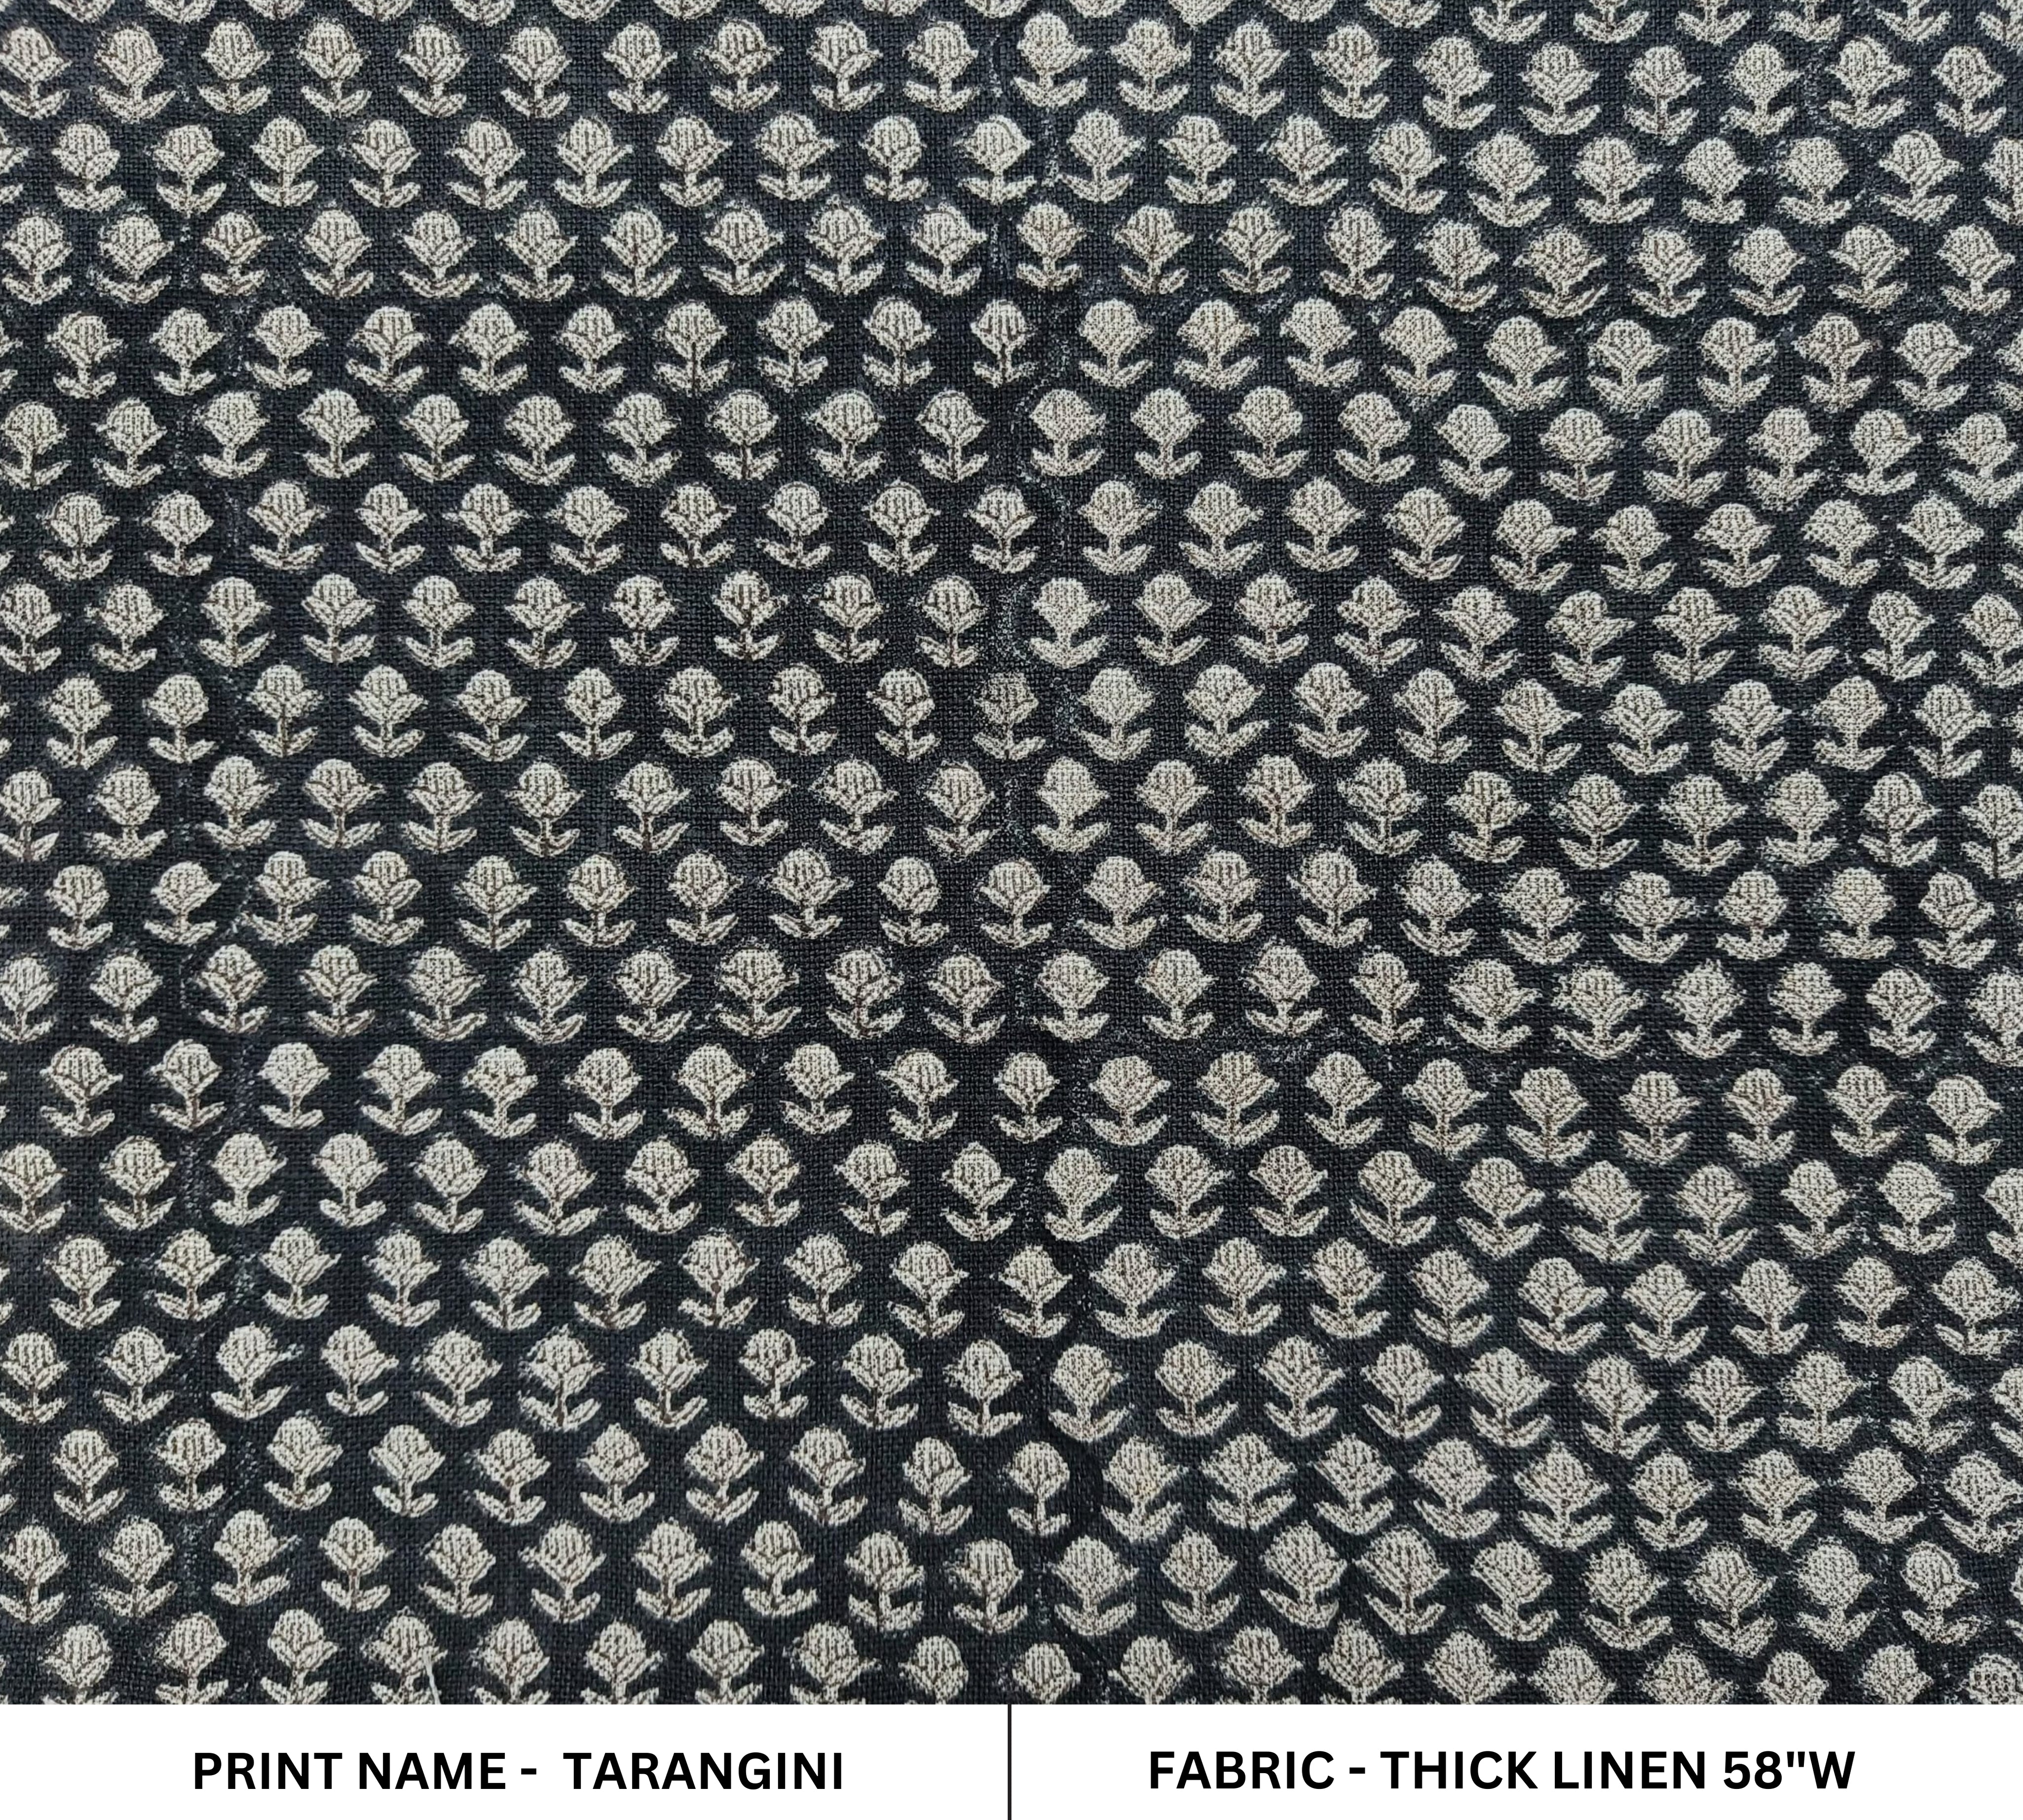 Block Print Linen Fabric, Tarangini Black Best Heavy Linen With Indian Hand Block Print  Running Fabric By The Yard  Perfect For  Upholstery, Pillow & Cushion